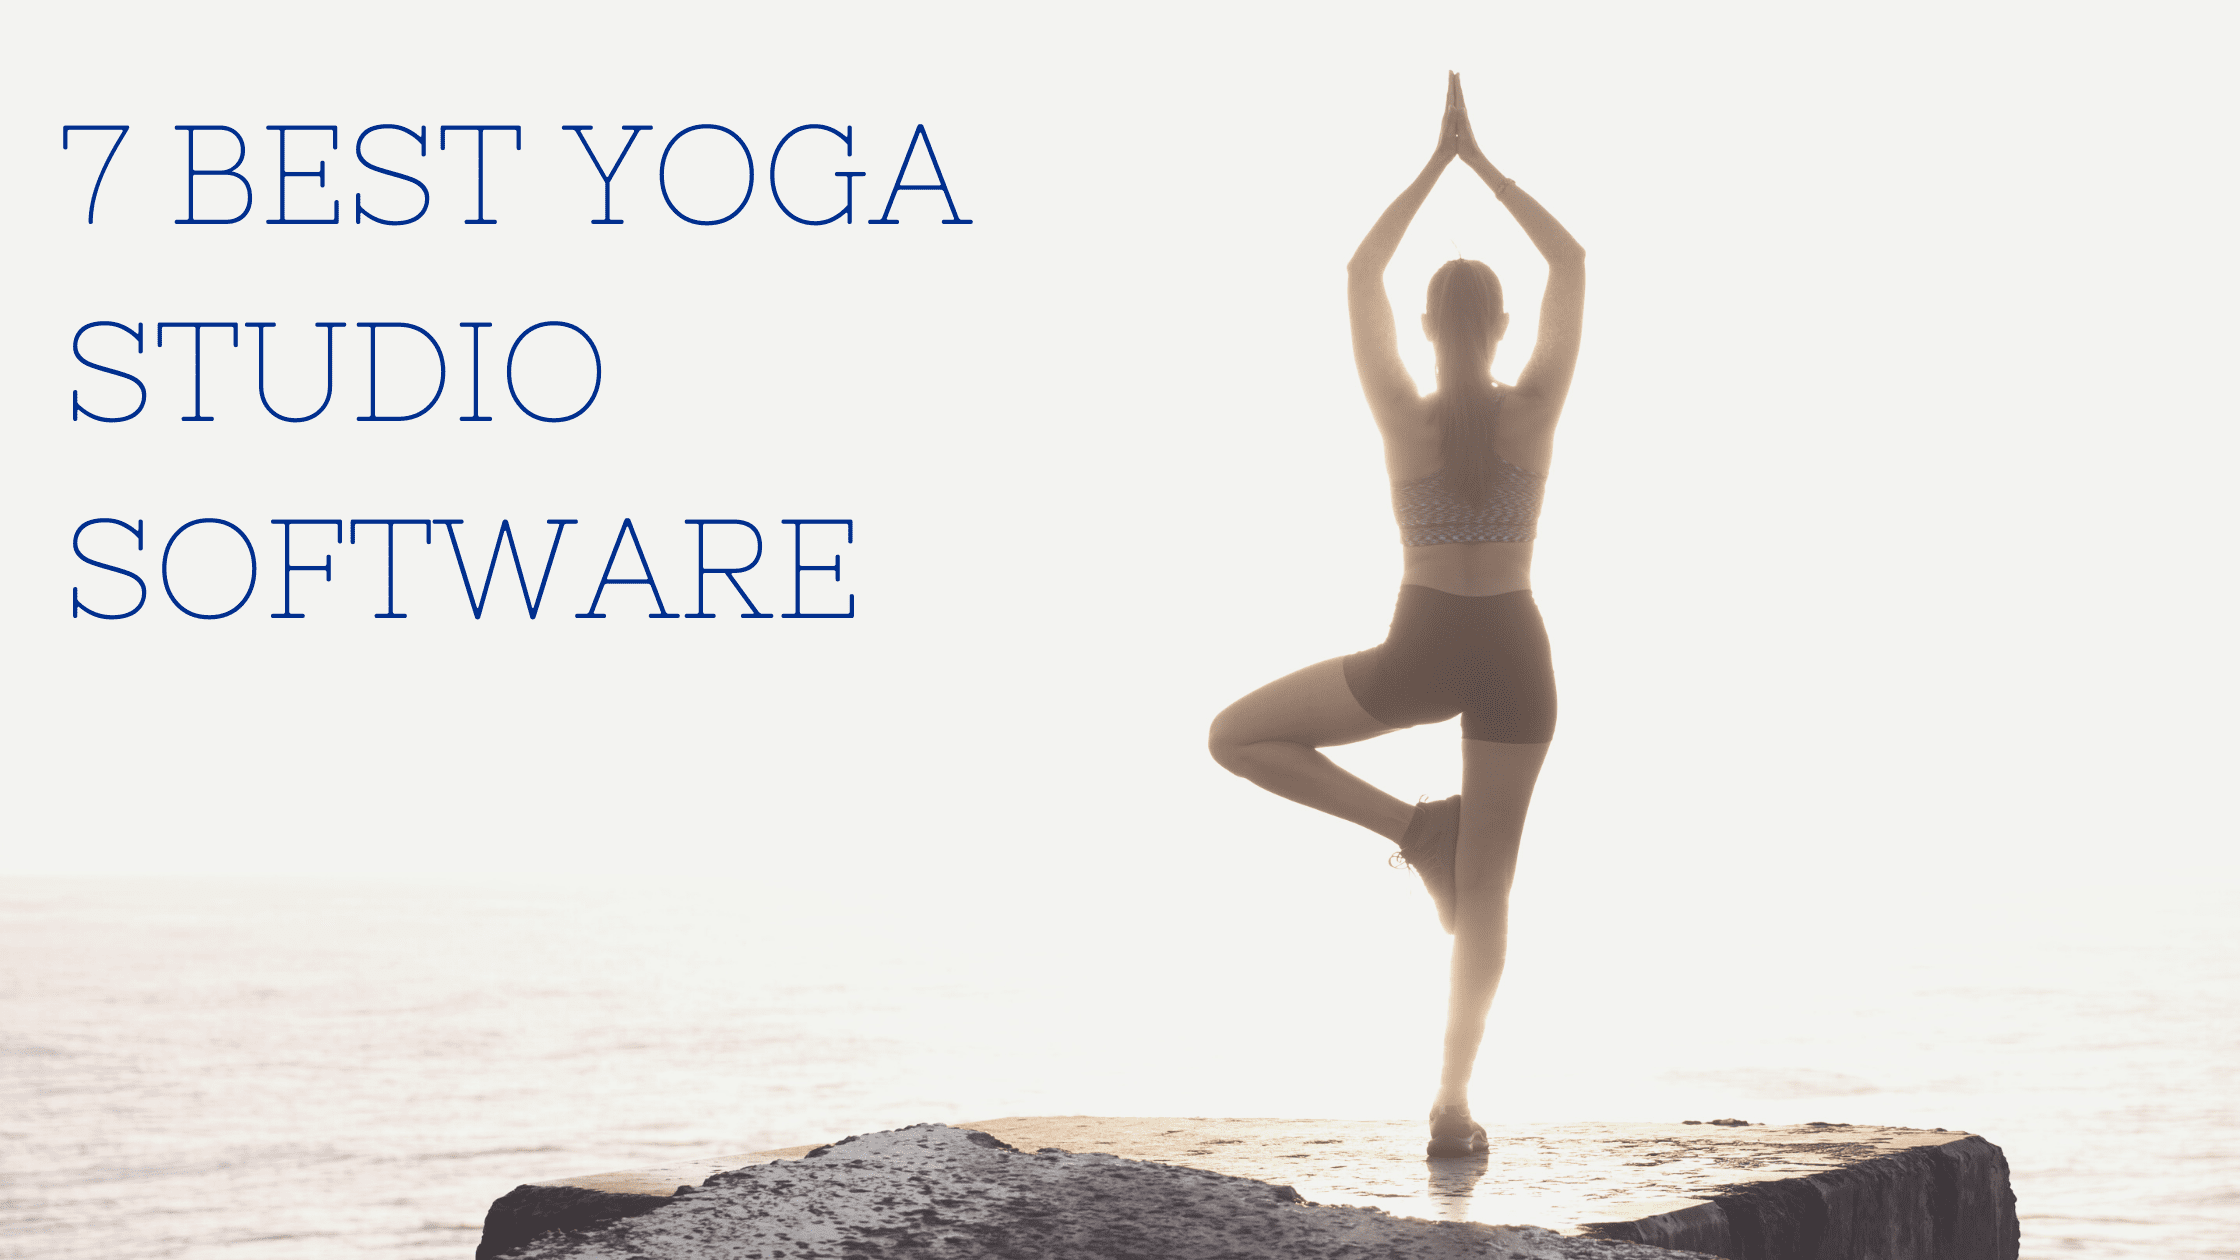 7 Best Yoga Studio Software for Easy Class Scheduling